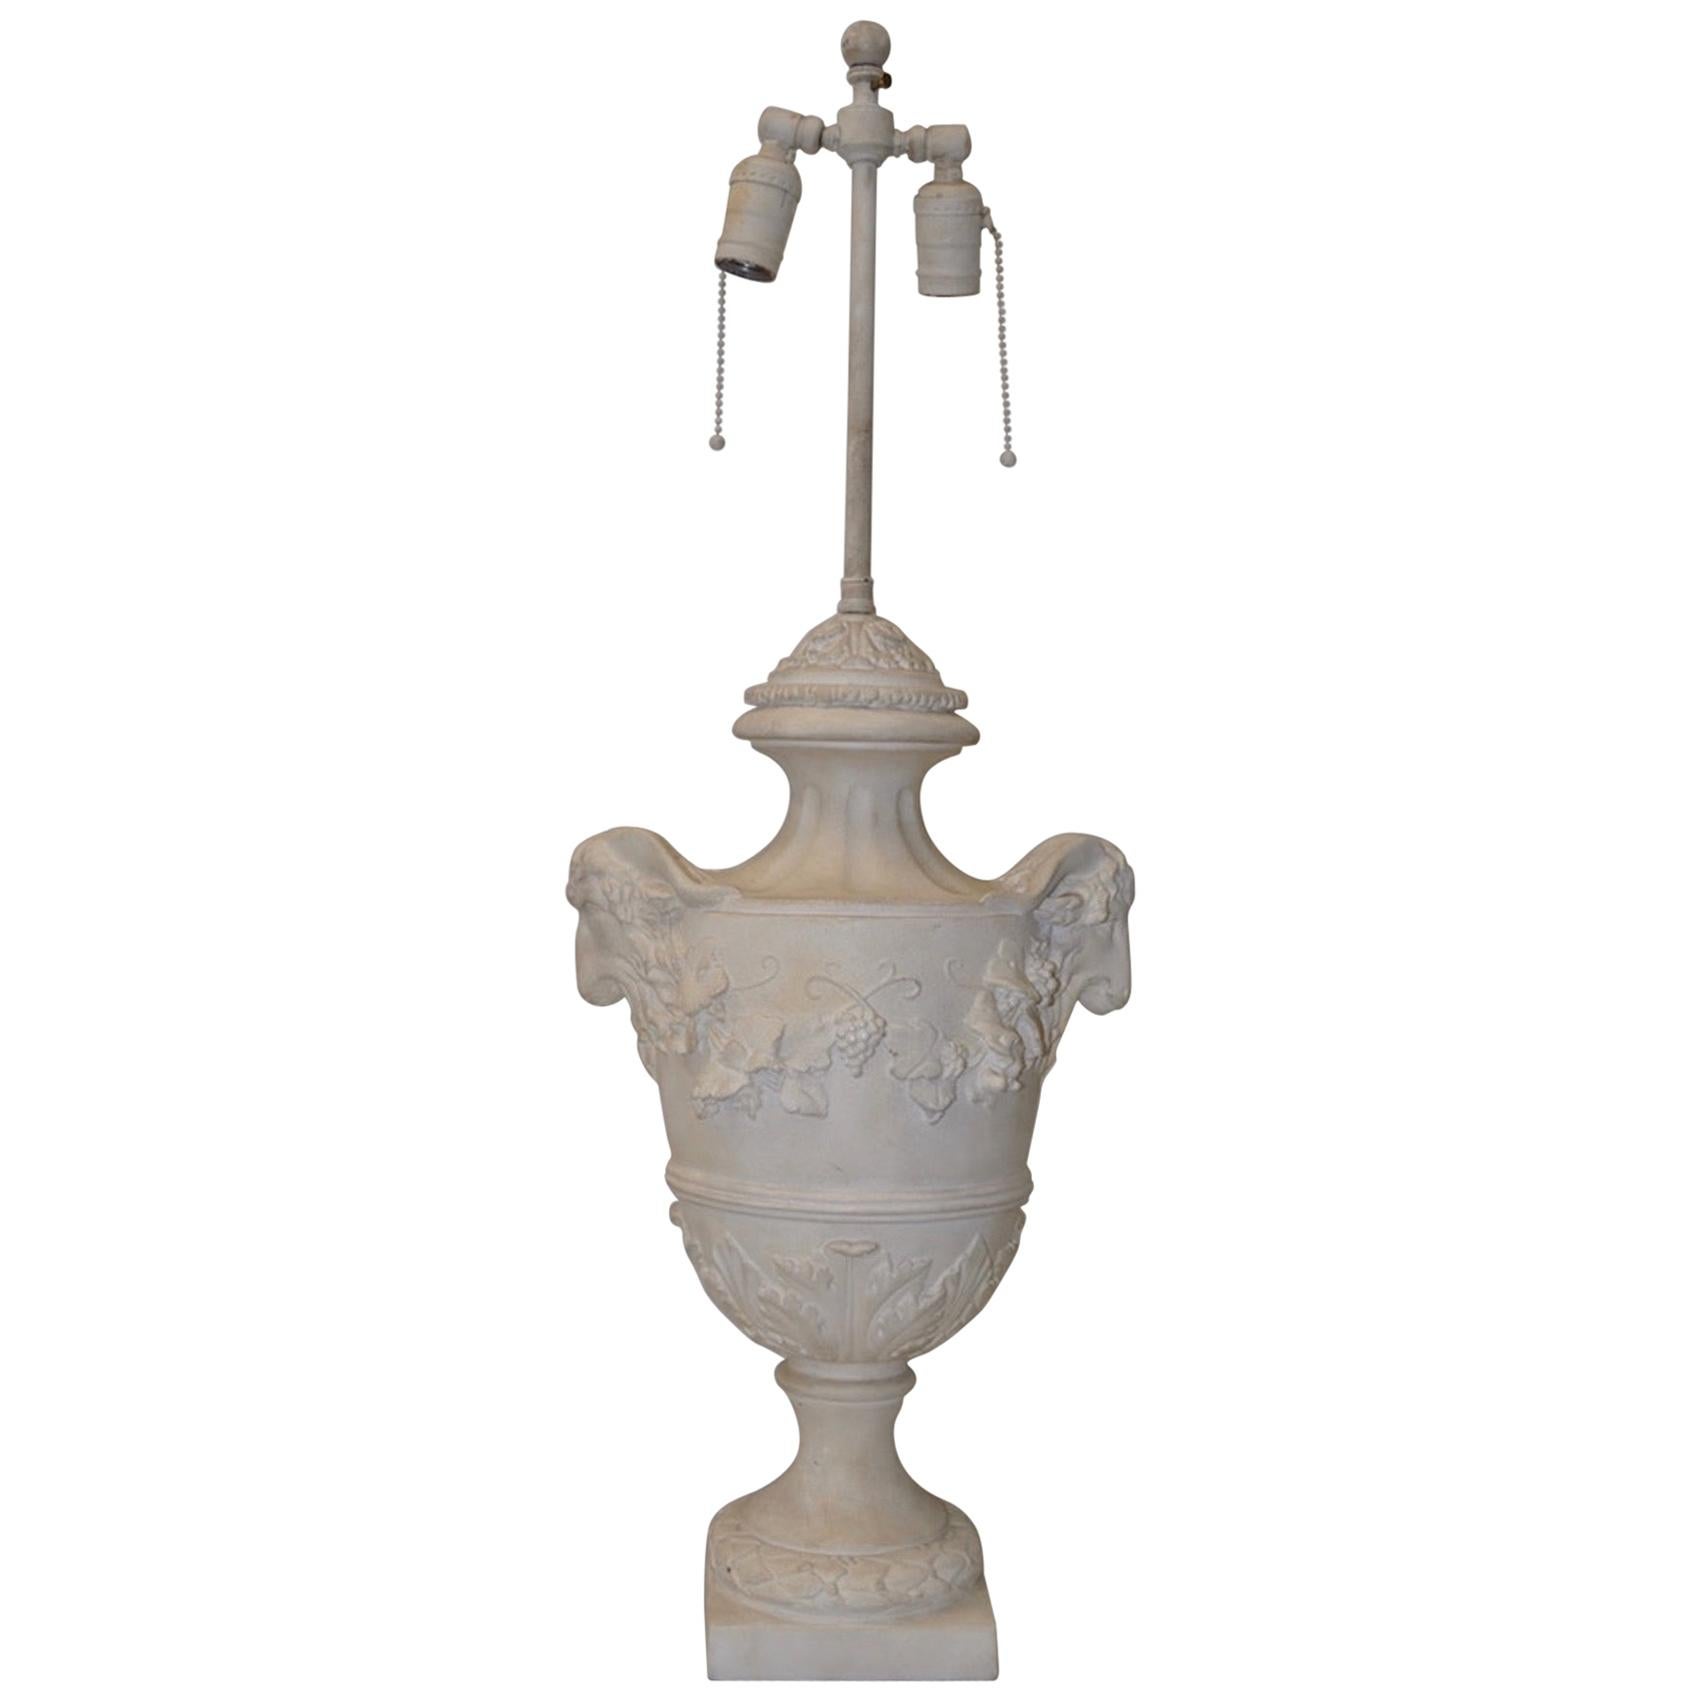 Elegant Plaster Urn Lamp with Rams Head Handles, circa 1950s For Sale